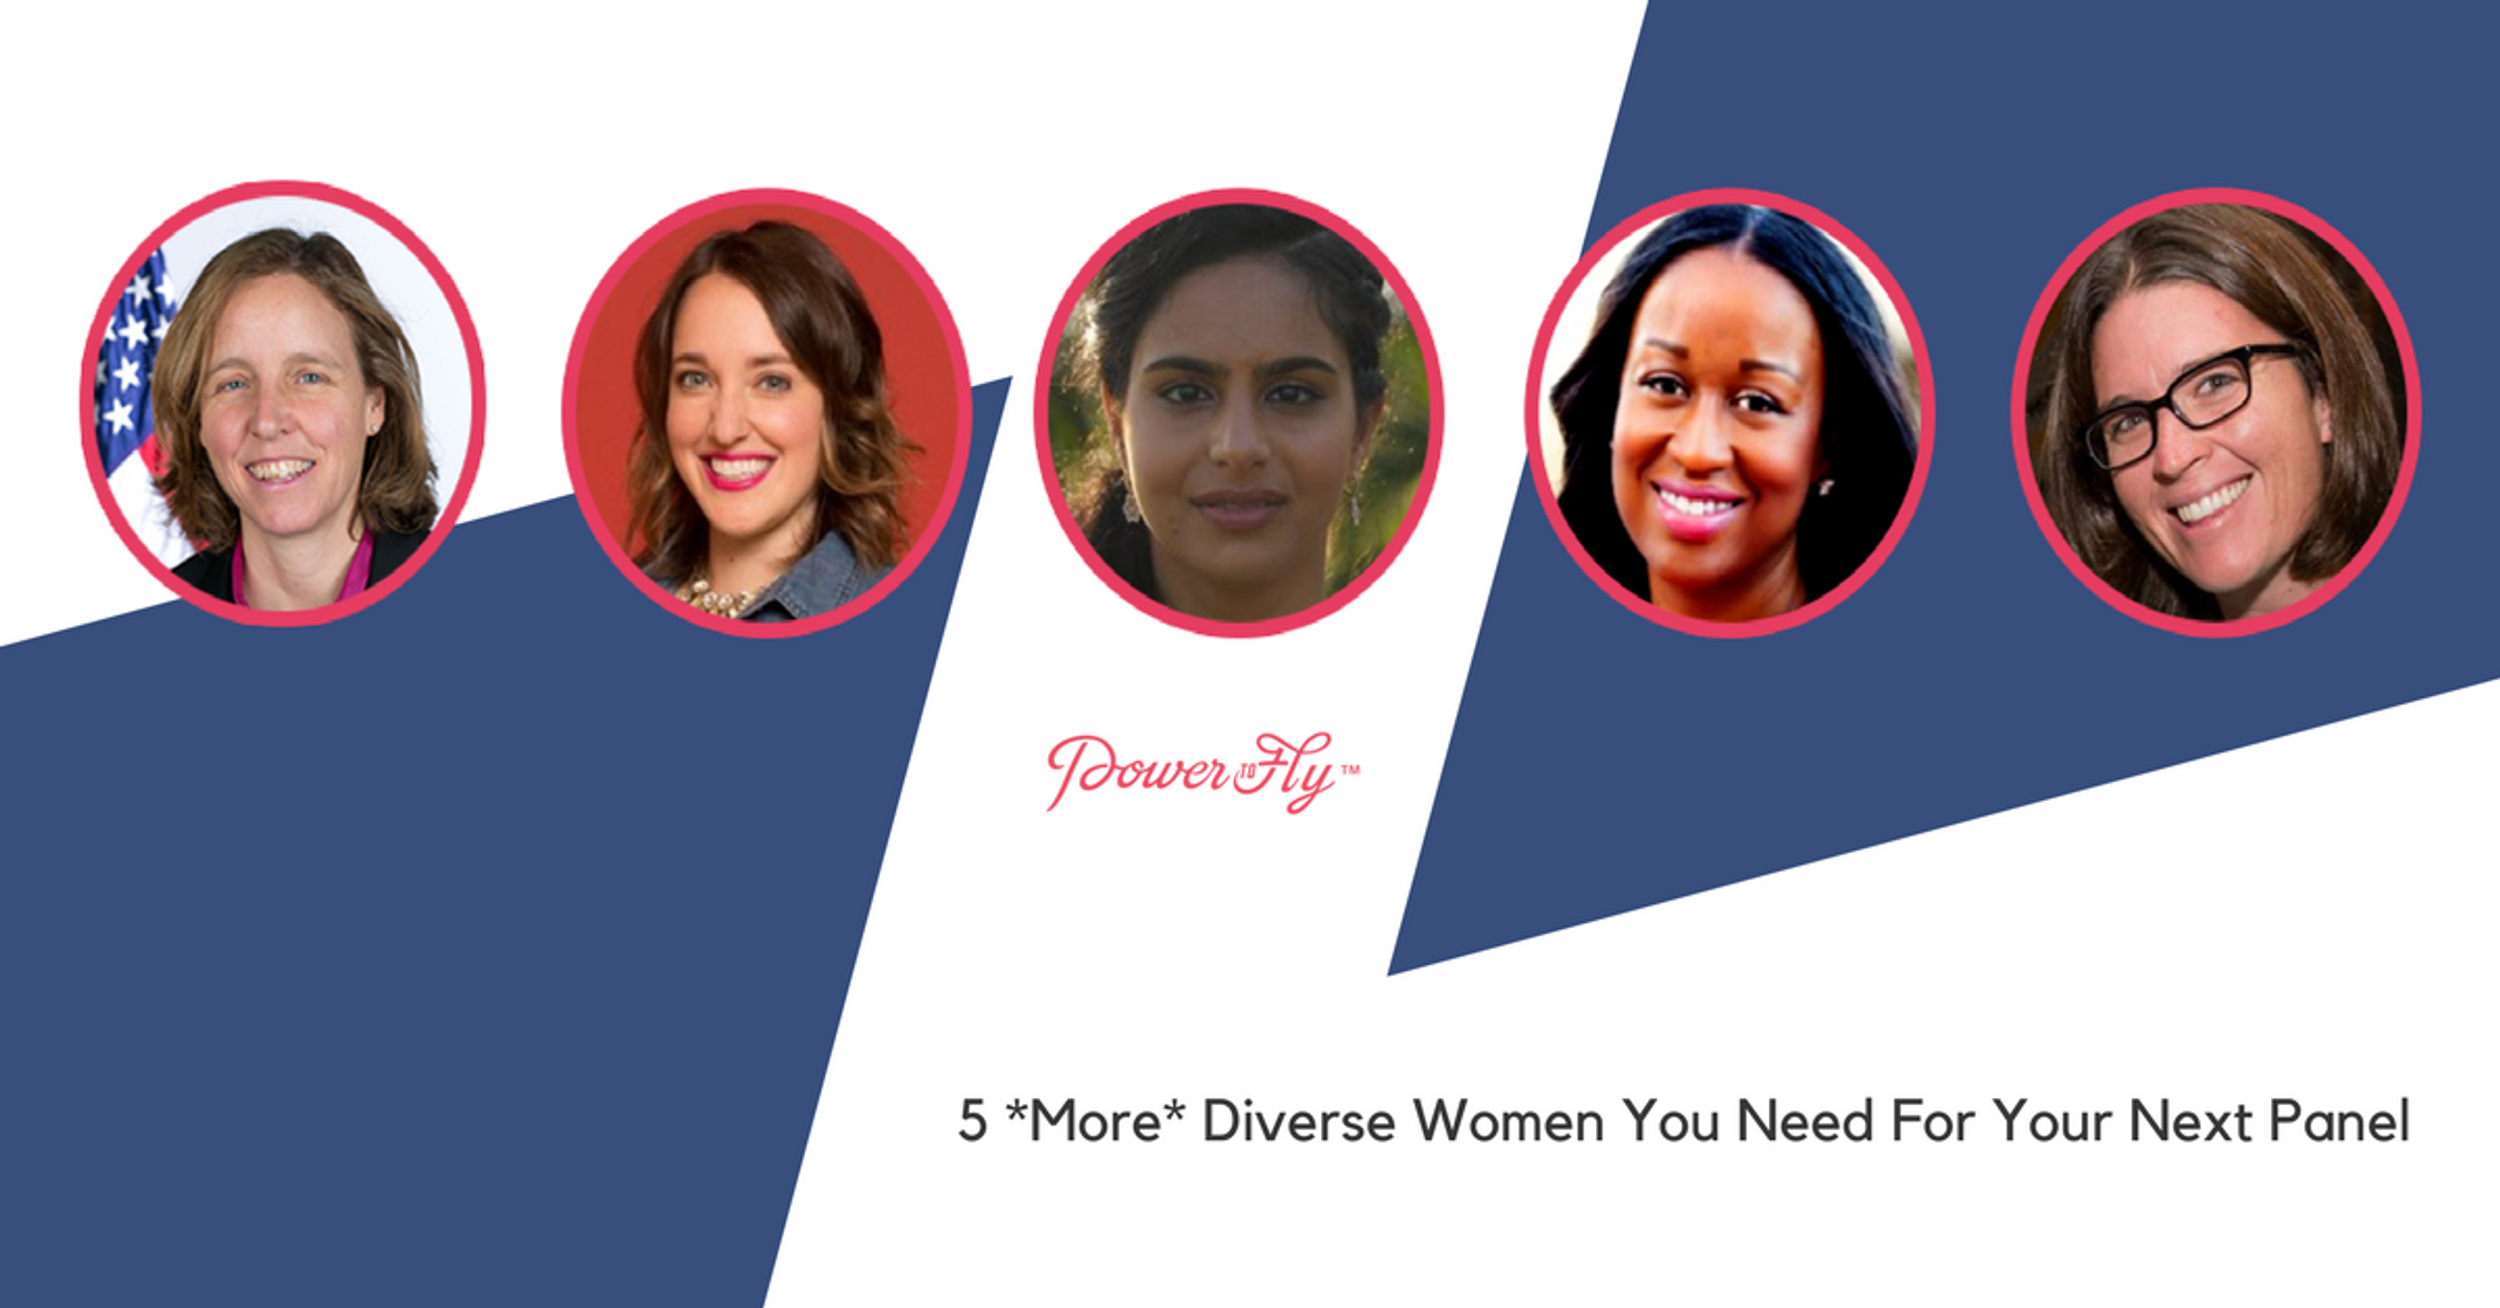 5 *More* Diverse Women You Need For Your Next Panel